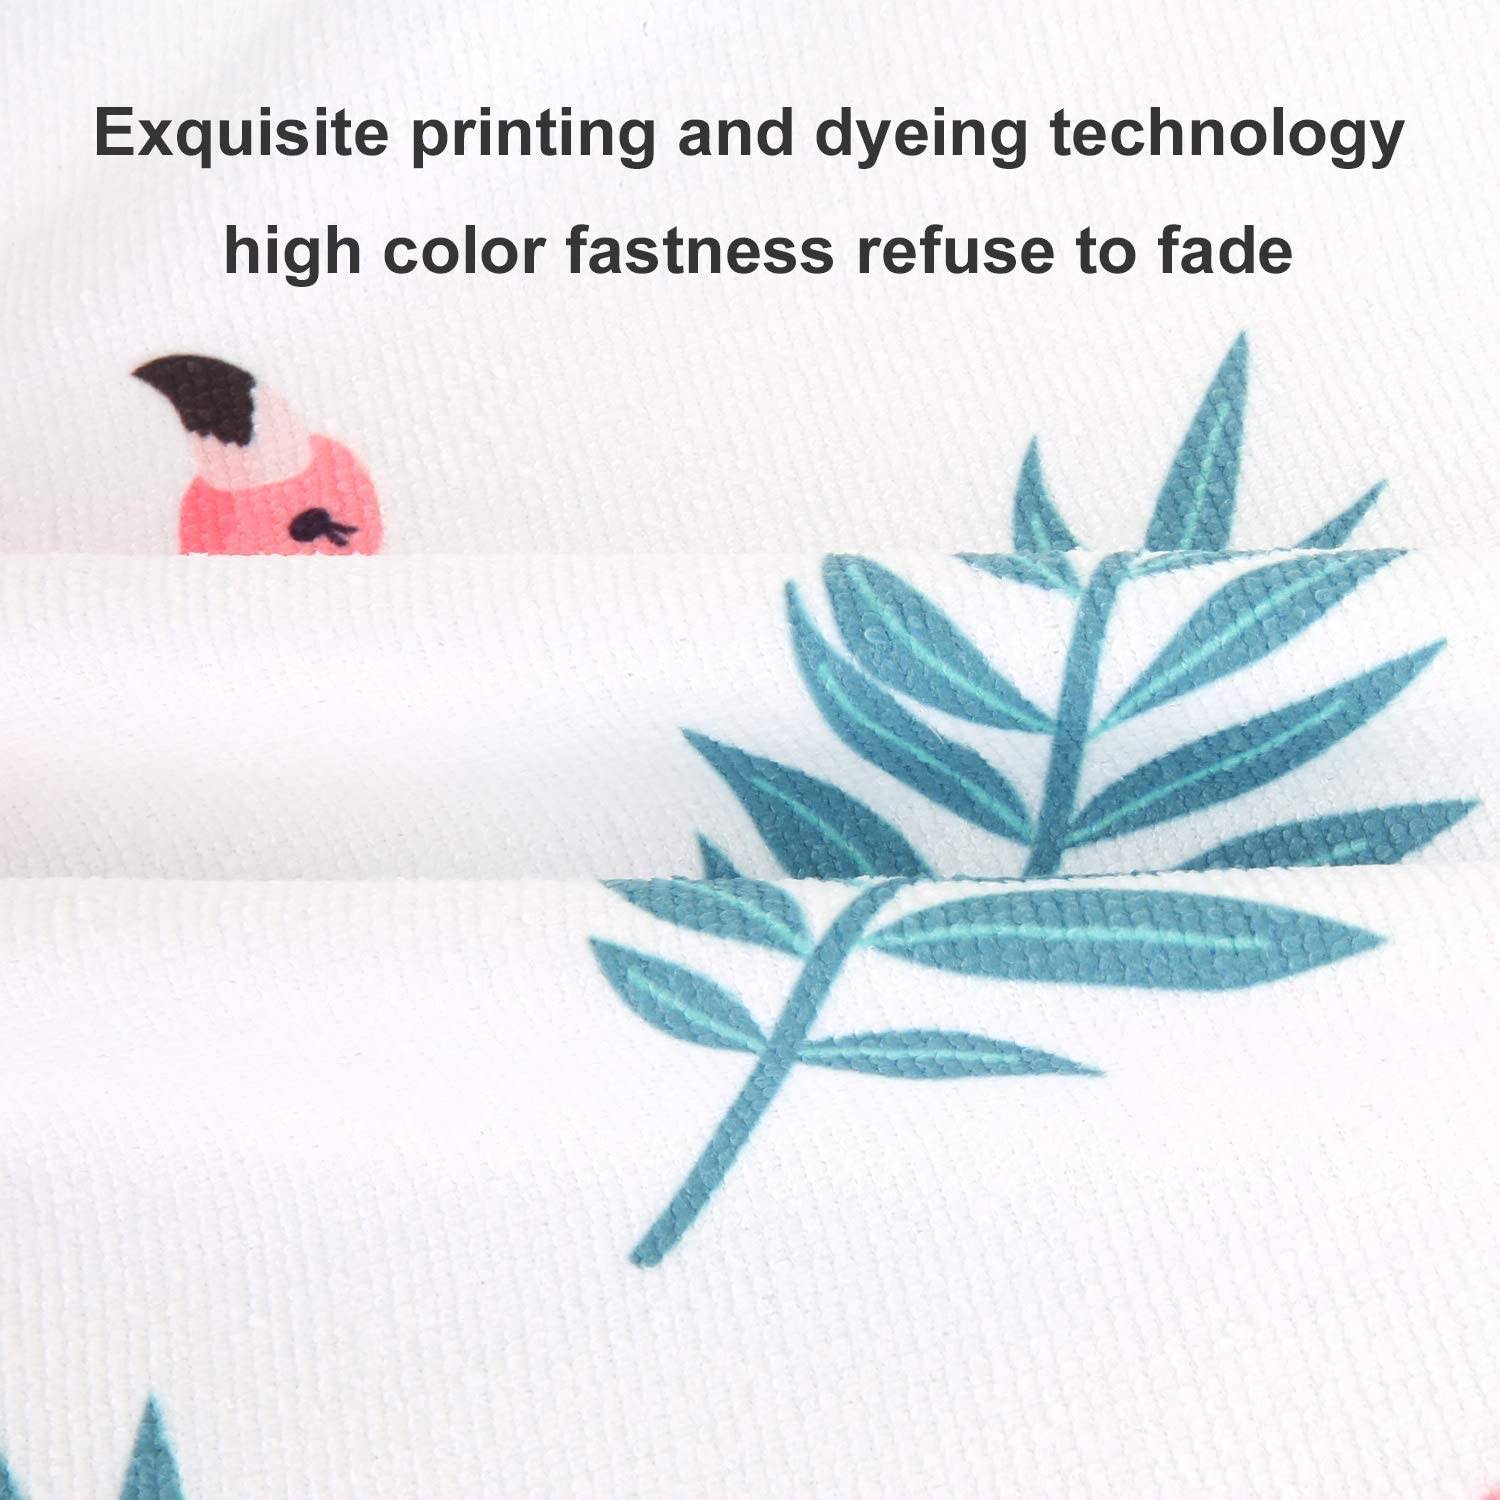 Wholesale Price Terry Solid - Microfiber Sand Free Pool Swimming Bath Beach Towel Blanket, for Women Girls, Lightweight Thin Quick Dry Super Soft Absorbent Camping Yoga Gym Sunbath Travel Sports I...